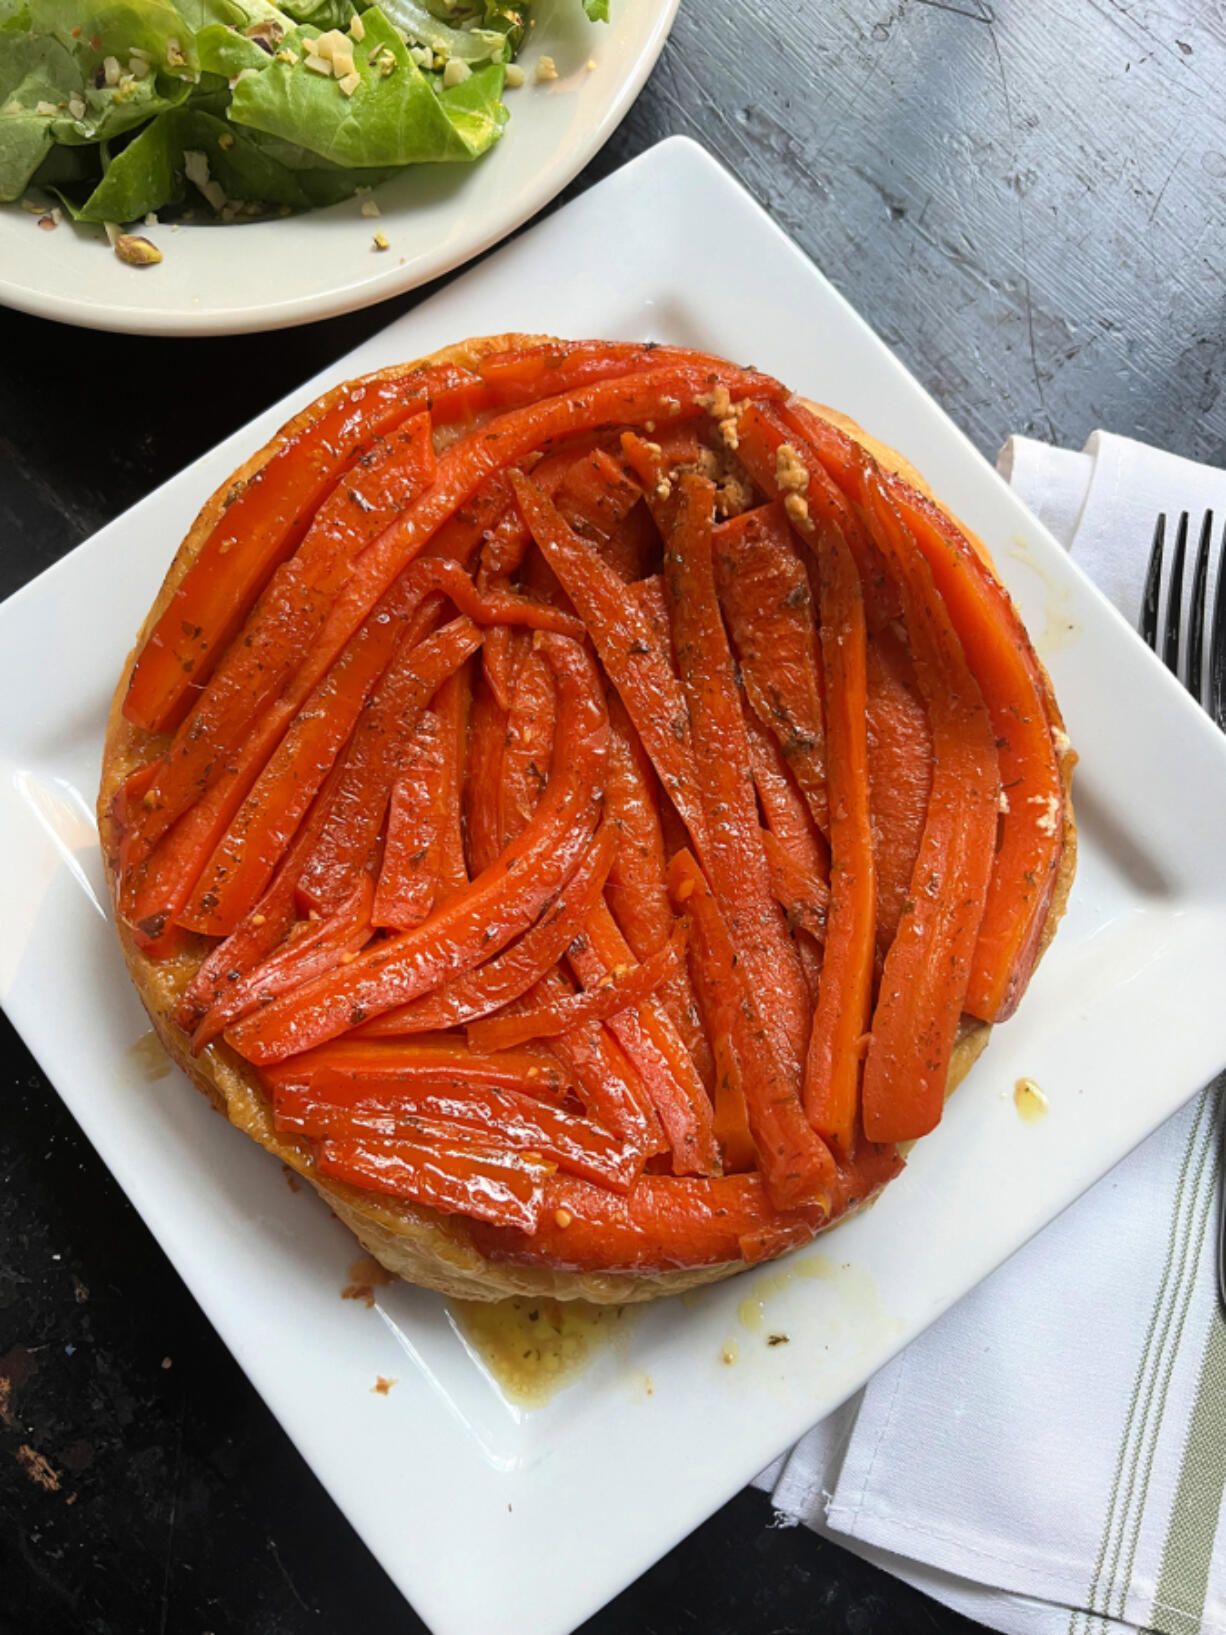 A savory carrot tarte tatin is paired with a green salad for a simple, and elegant, vegetarian supper.